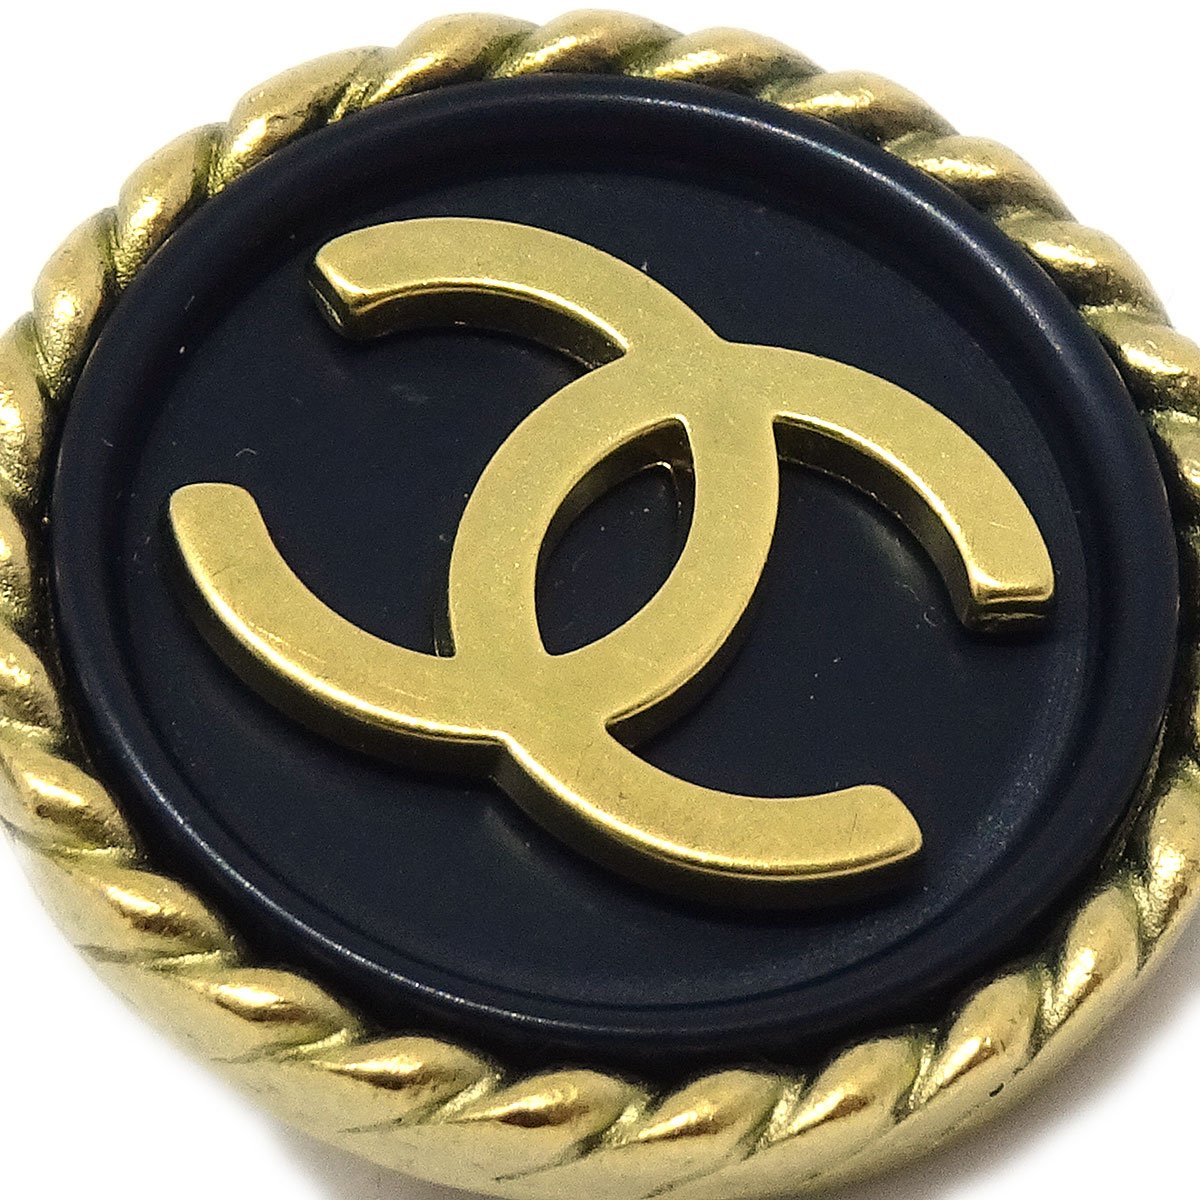 CHANEL, Jewelry, Chanel Button Earrings Gold Black Clipon 94a 4272